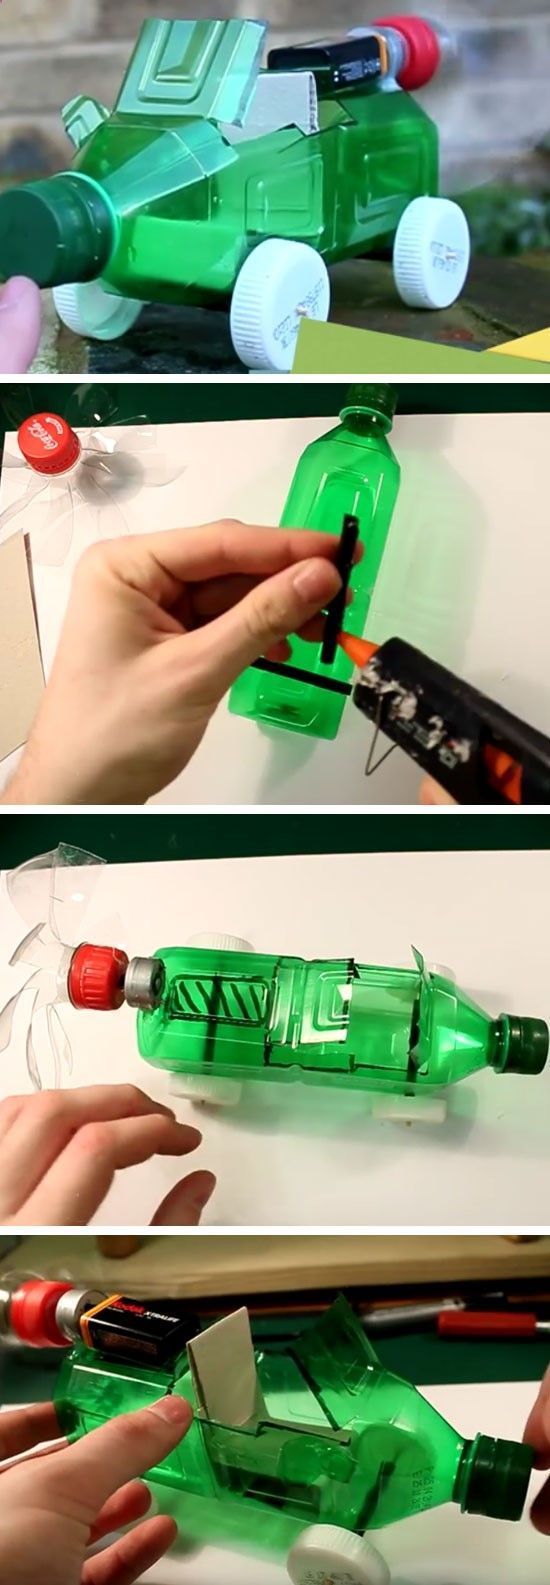 Battery Reconditioning - Easy Recycled Bottle Battery Powered Car | 18 DIY Summer Art Projects for Kids to Make | Easy Art Projects for Teens - Save Money And NEVER Buy A New Battery Again -   23 recycled crafts for teens
 ideas